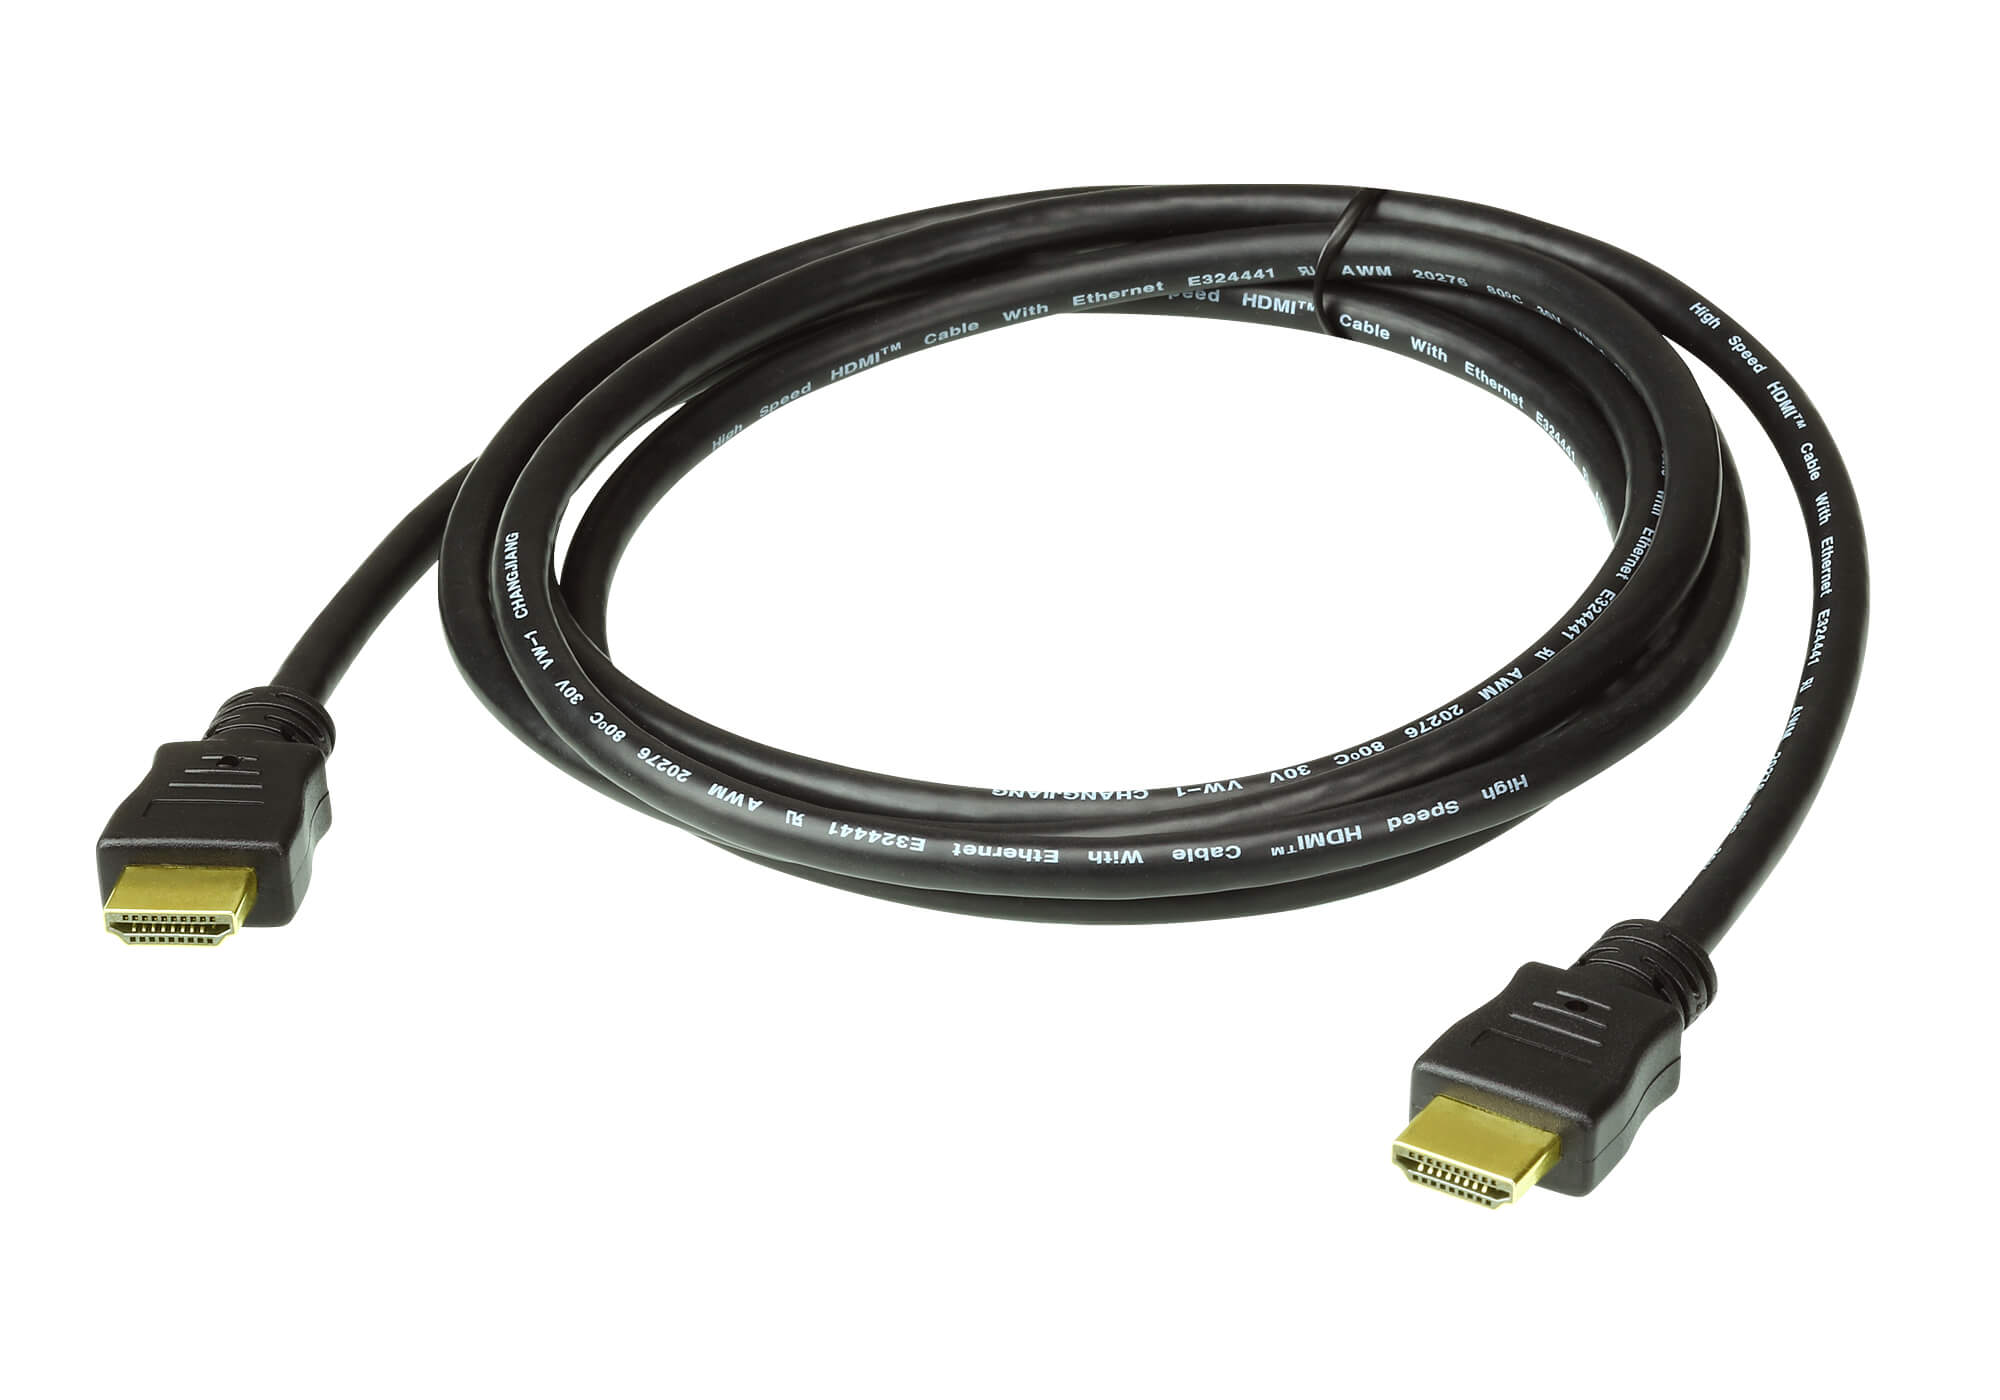 KVM Switches/Aten: Aten, 10M, High, Speed, HDMI, Cable, with, Ethernet., Support, 4K, UHD, DCI, up, to, 4096, x, 2160, @, 30Hz, 